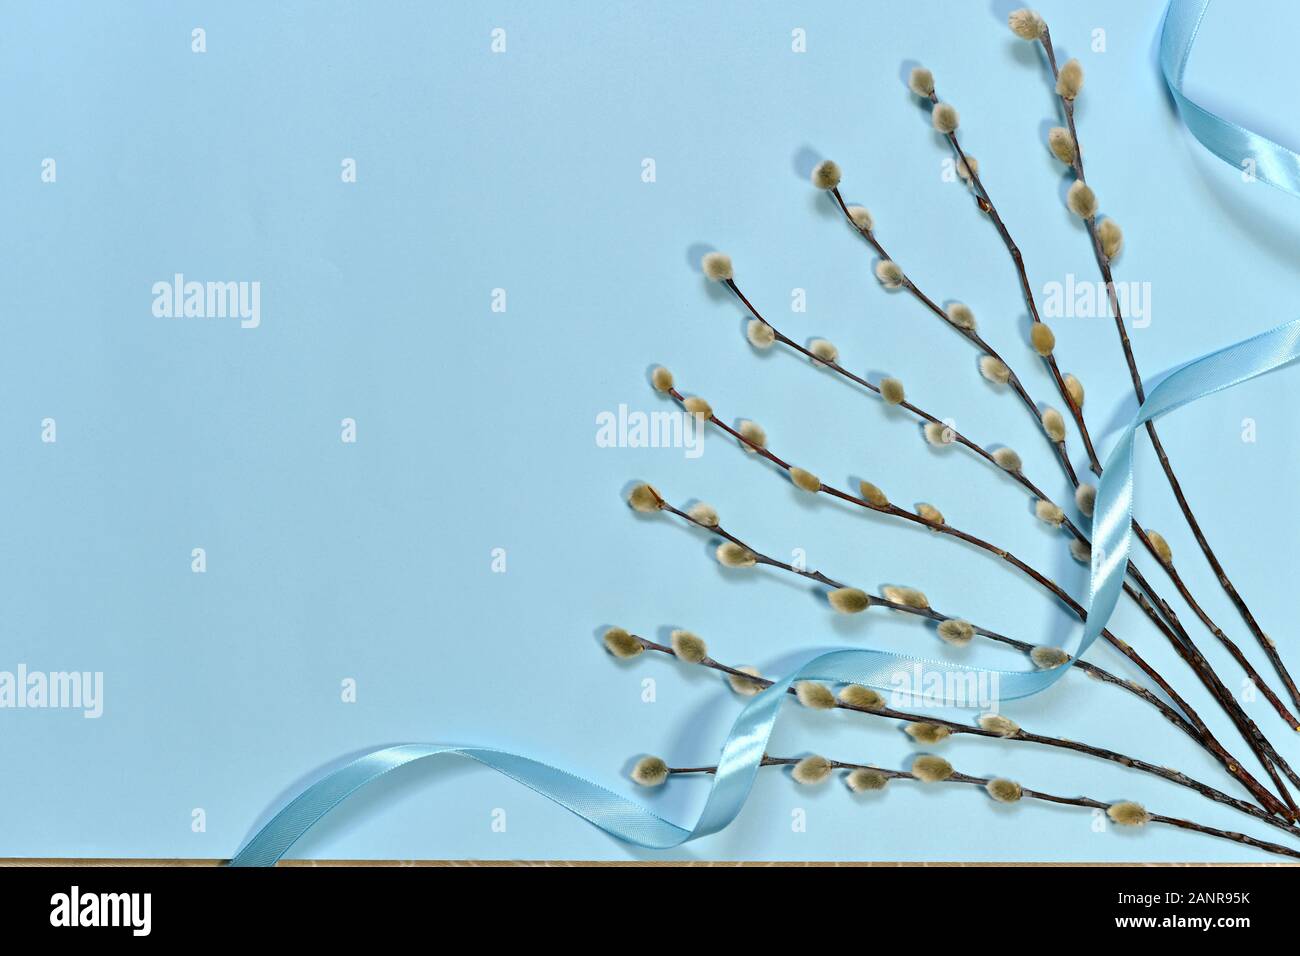 The sprigs of the spring willow are spread out by a fan and a blue satin ribbon thrown from above on a blue background. Stock Photo